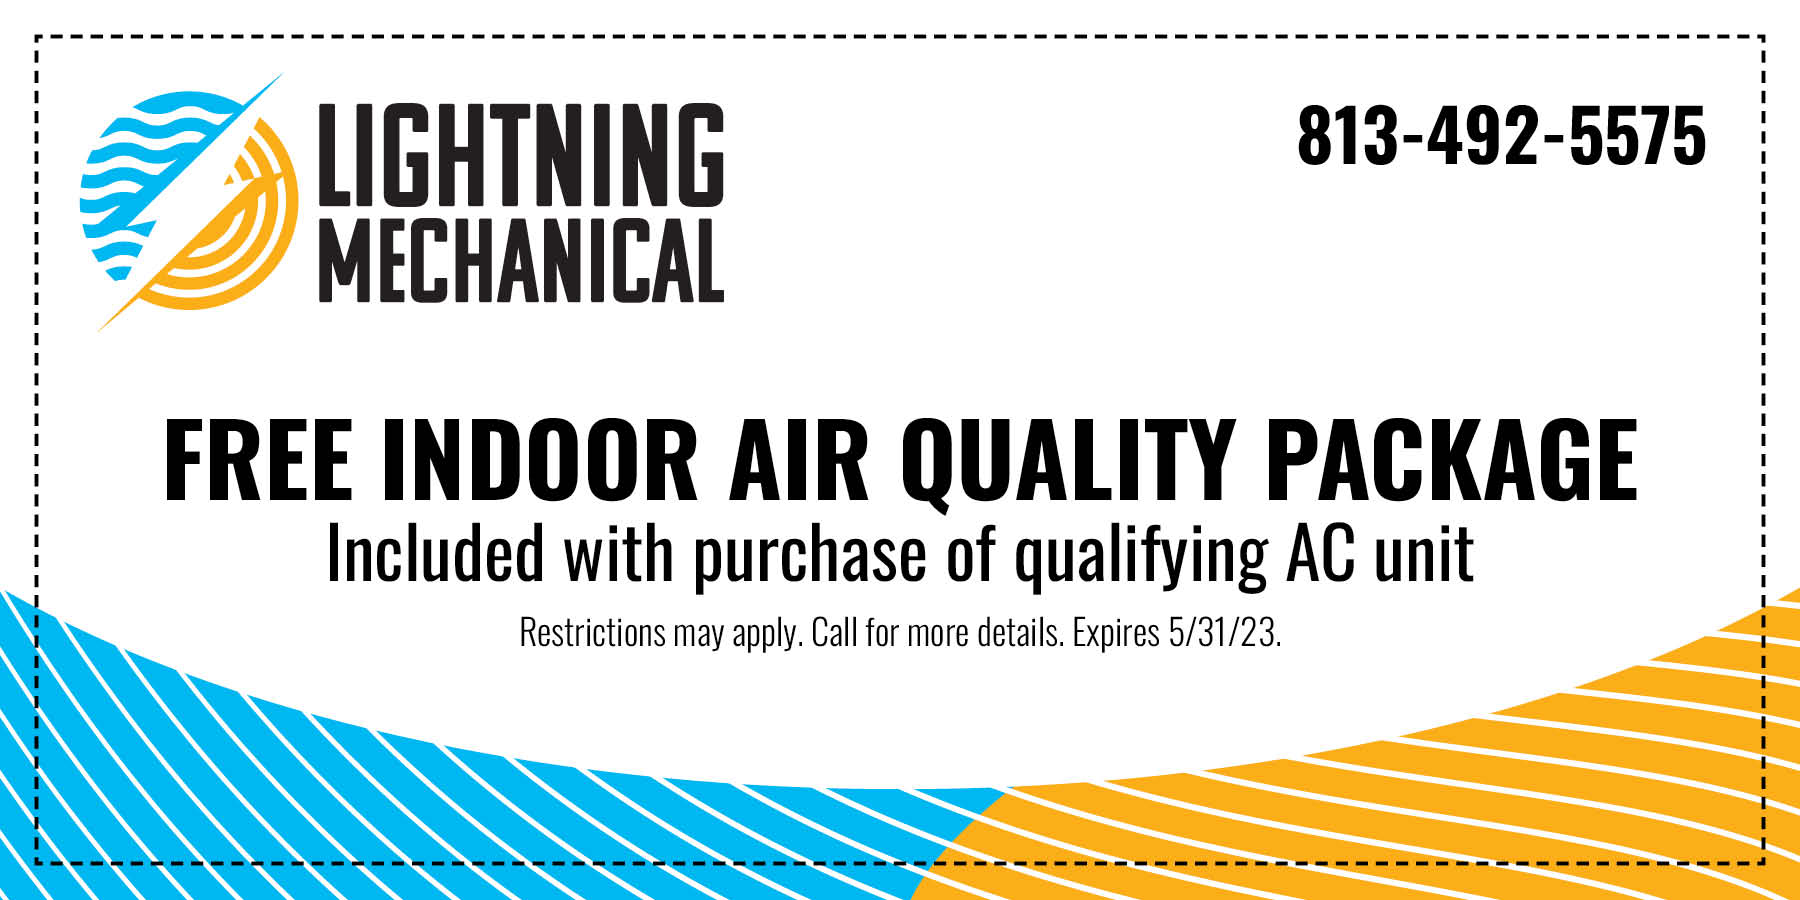 Free indoor air quality package included with purchase of qualifying AC unit expires 5/31/2023.